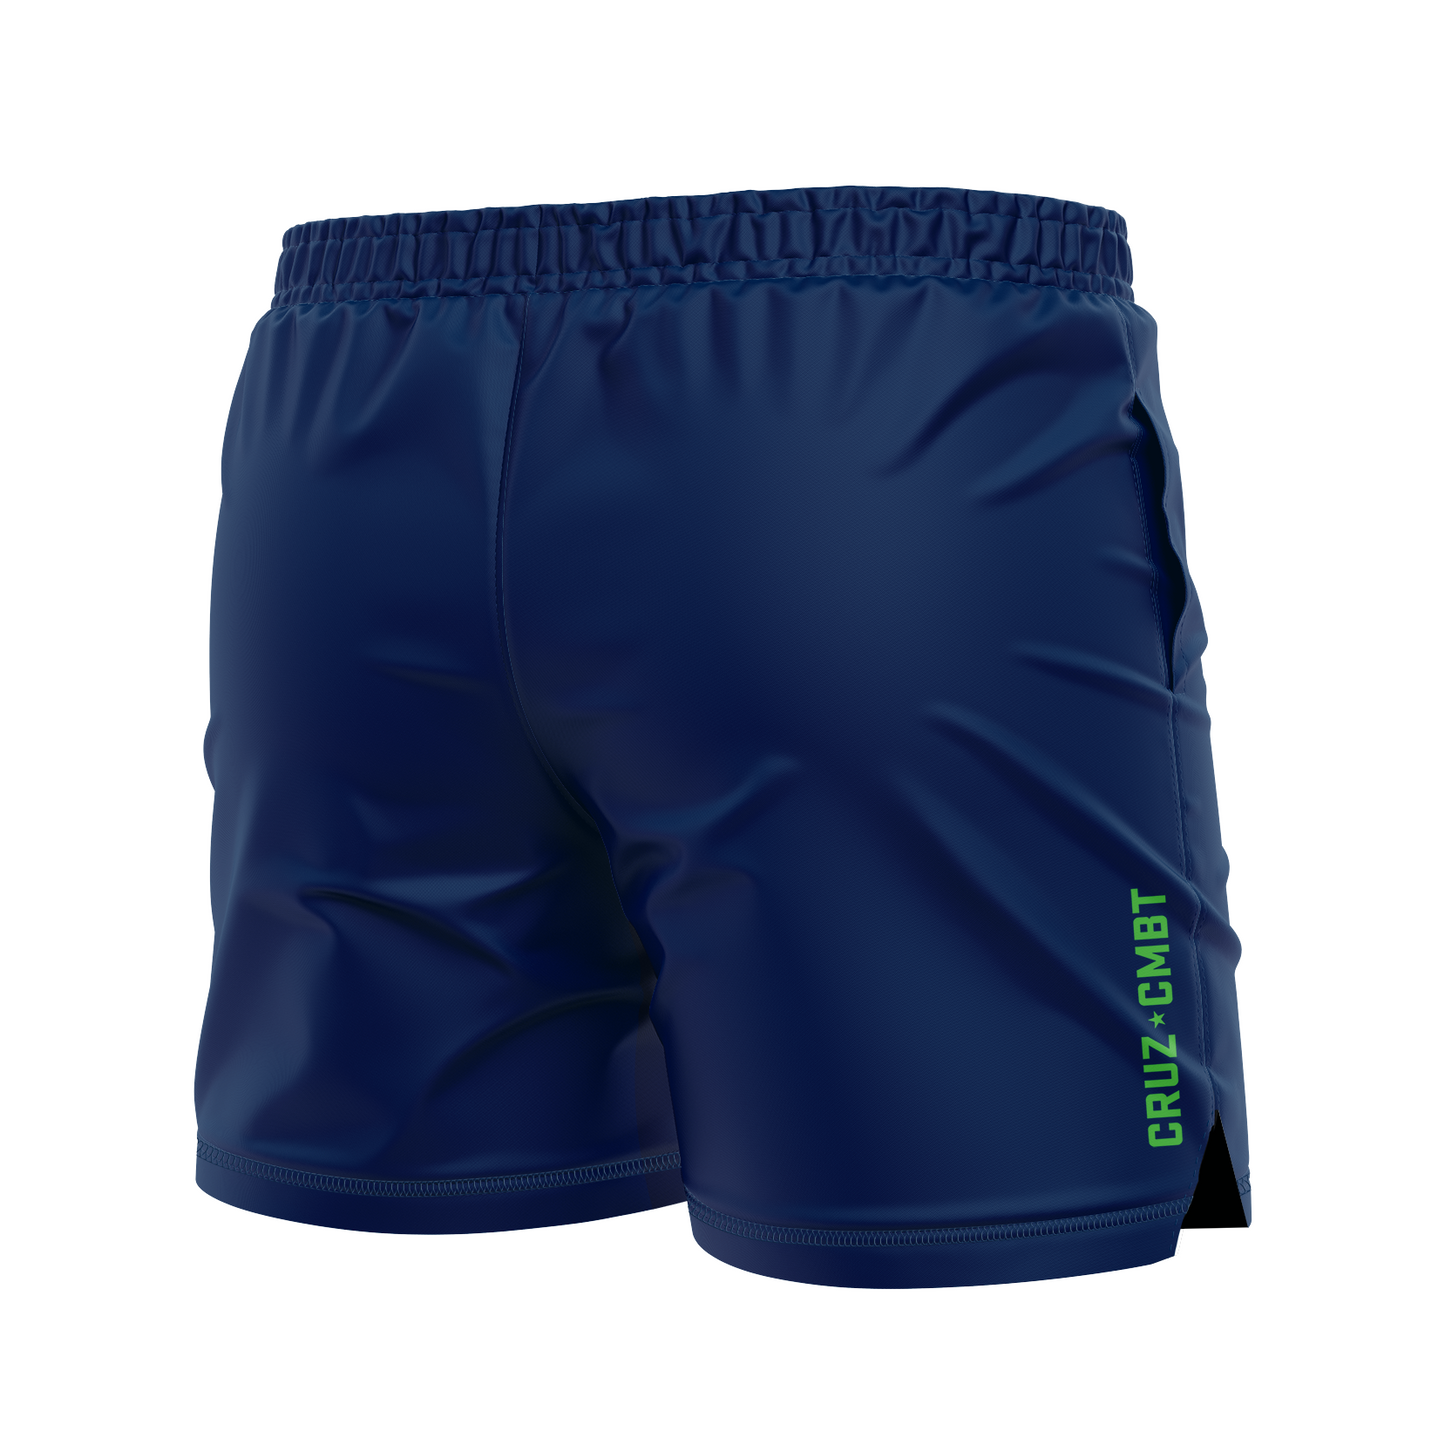 Base Collection men's FC shorts, navy and green